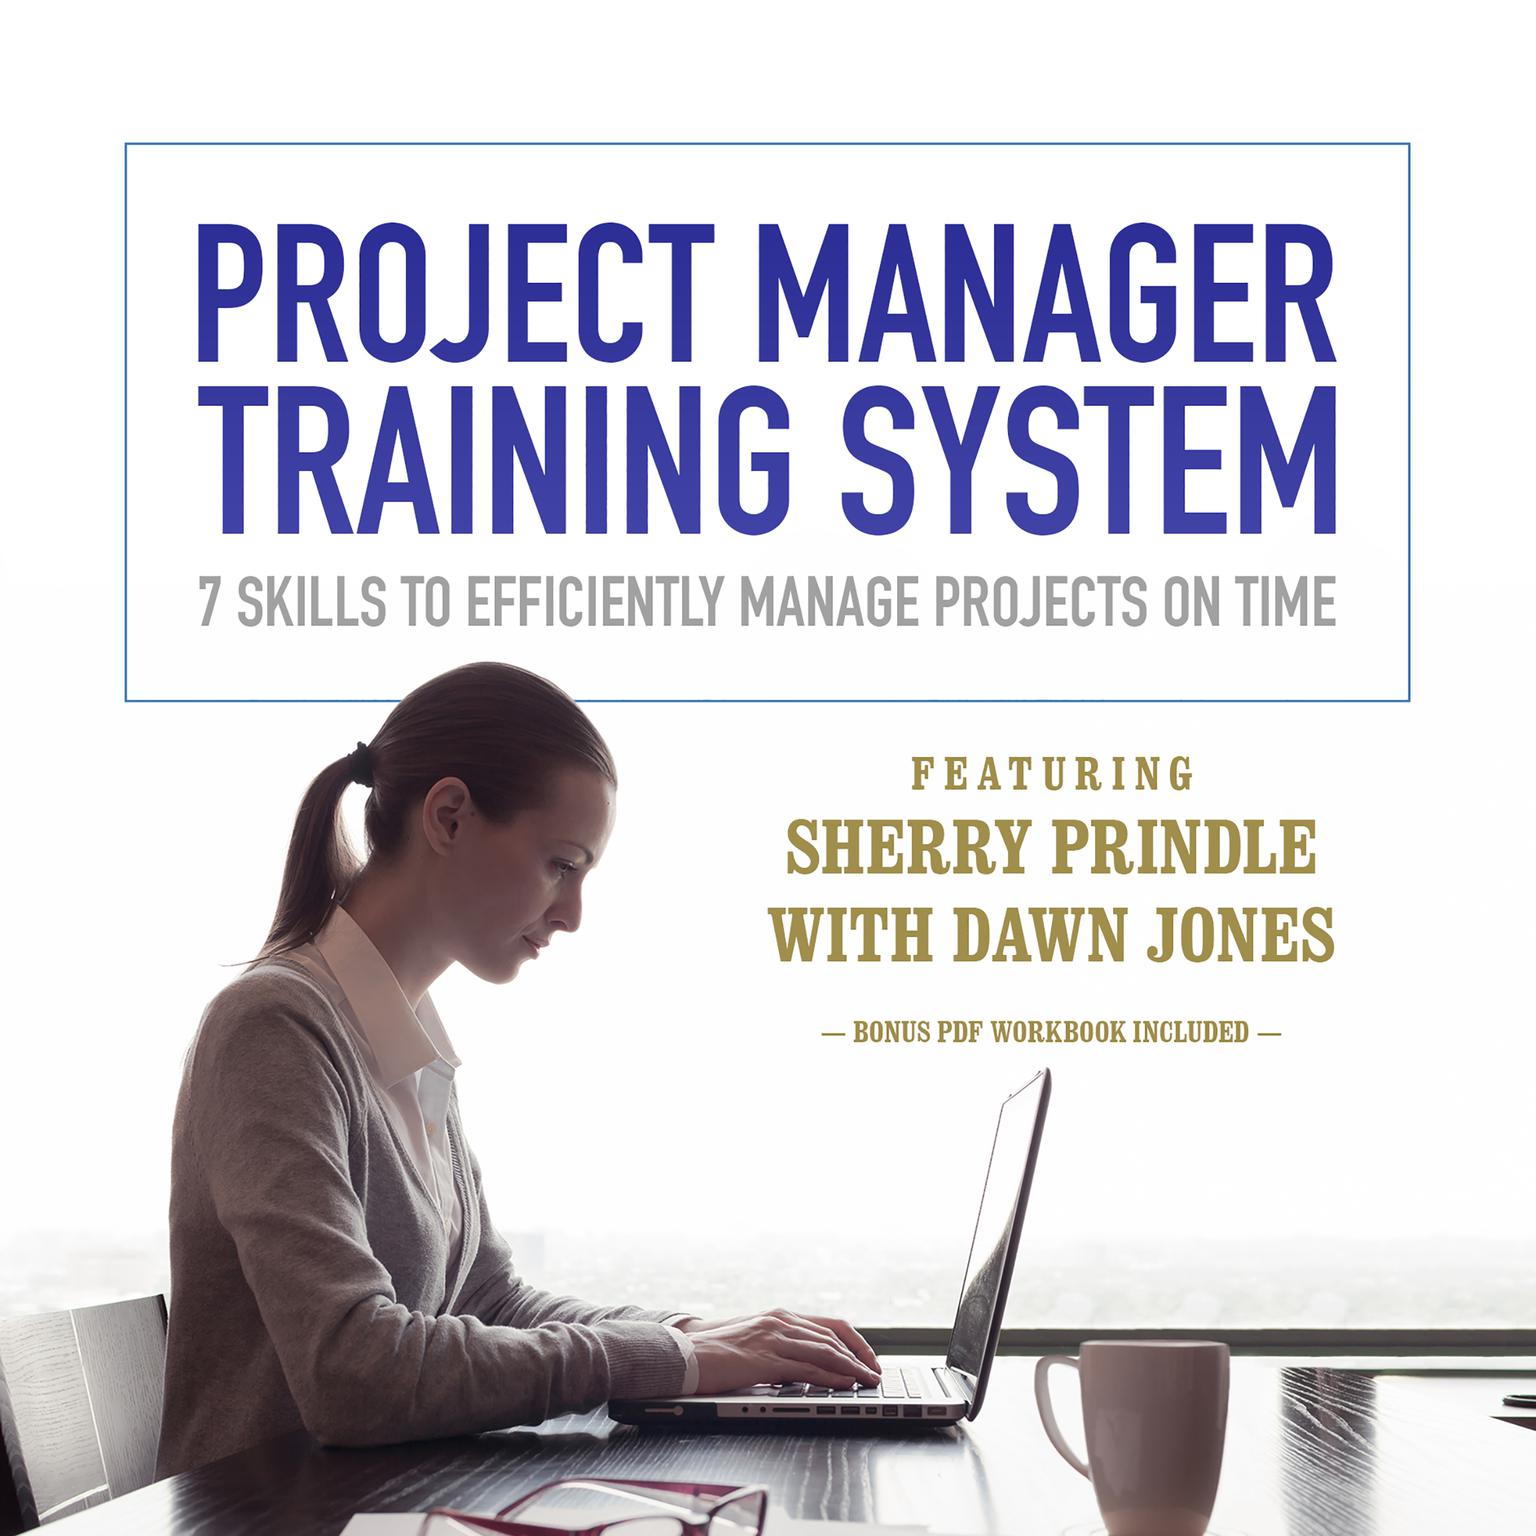 Project Manager Training System: 7 Skills to Efficiently Manage Projects on Time Audiobook, by Sherry Prindle